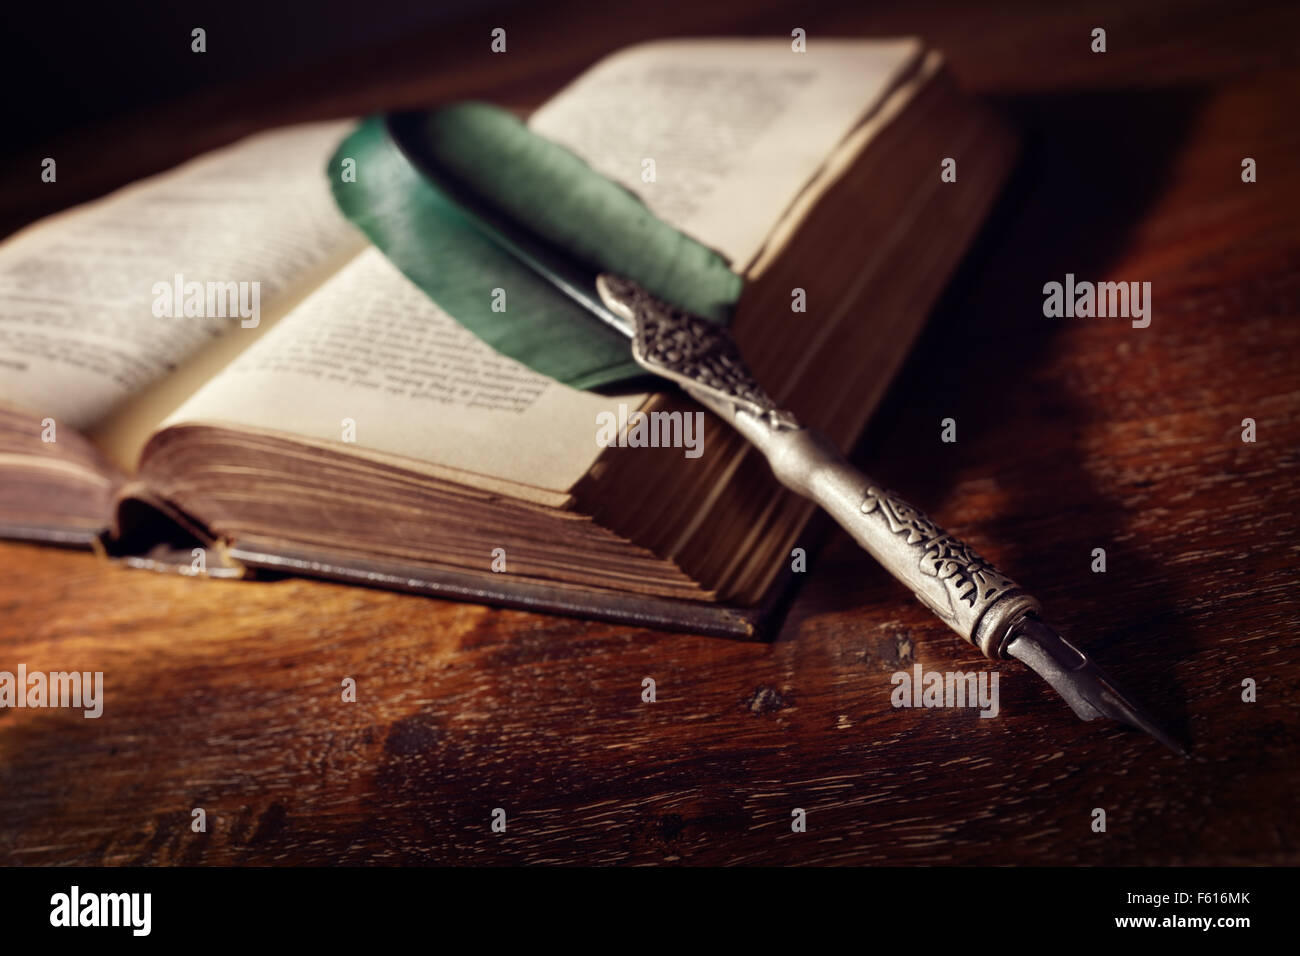 Quill pen resting on an old book on a desk concept for literature, writing, author and history Stock Photo